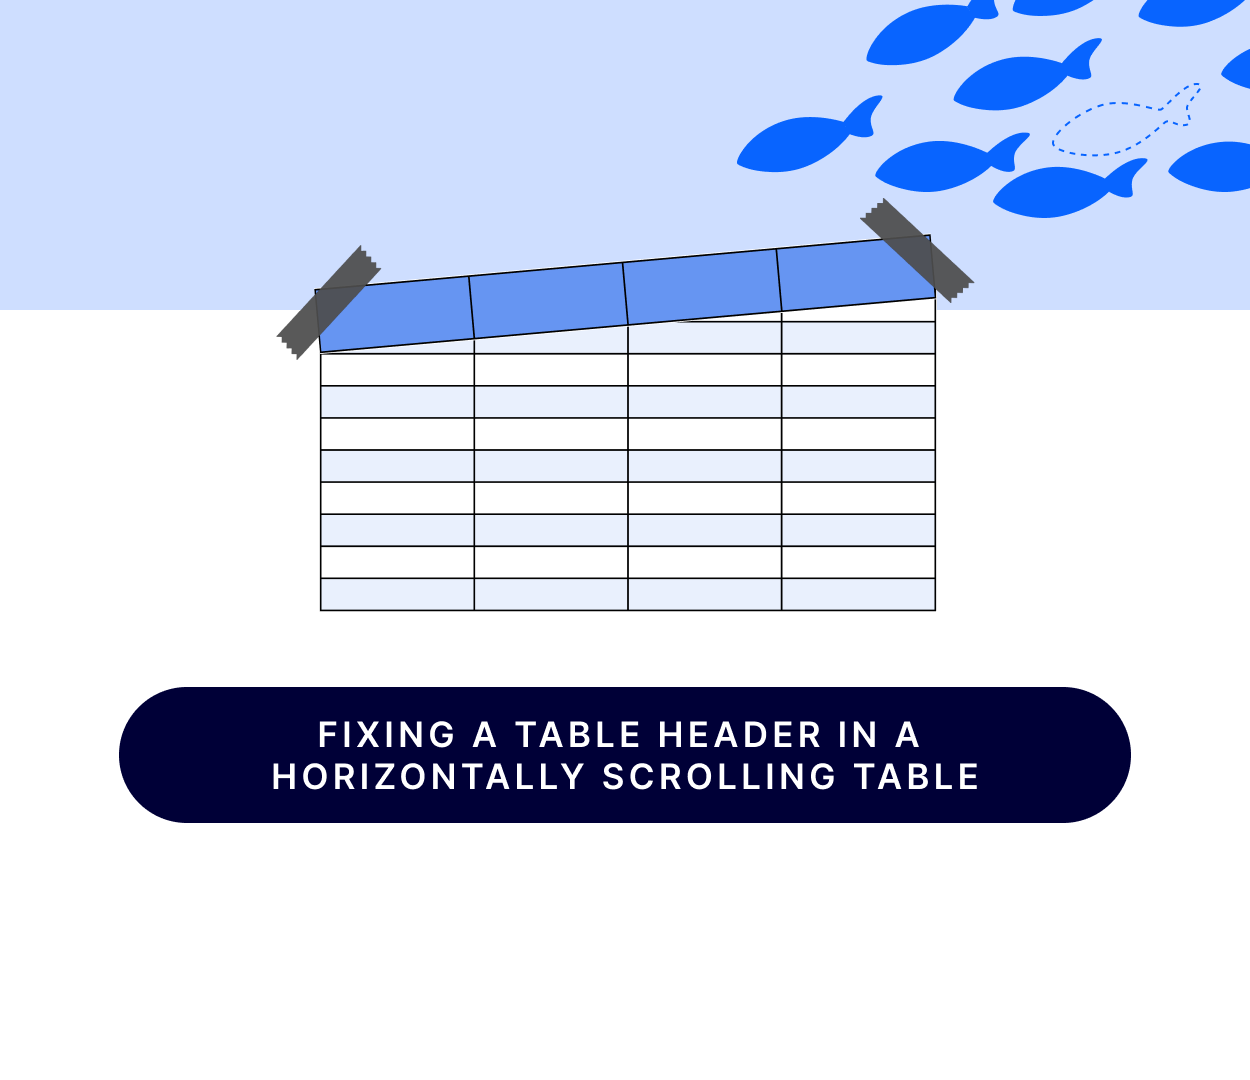 Fixing a table header on a horizontally scrolling table